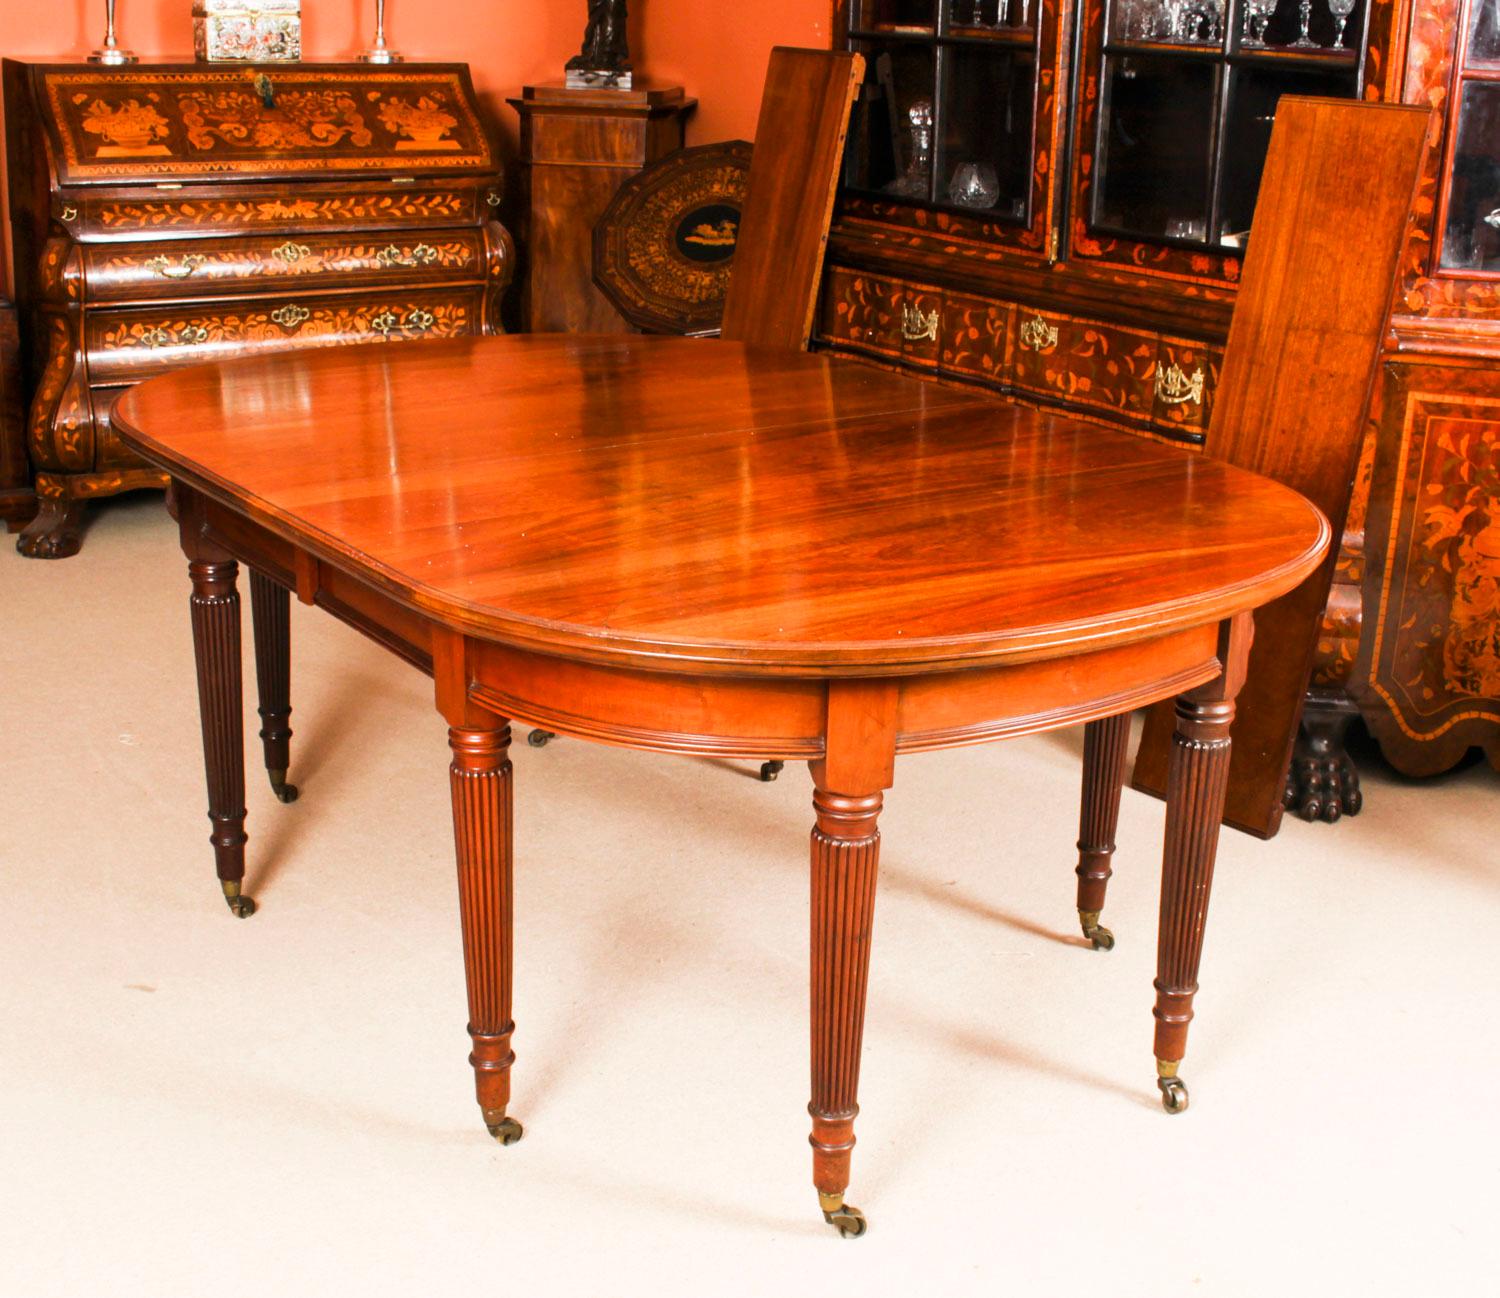 Leather Antique Victorian Oval Extending Dining Table & 6 Chairs, 19th Century